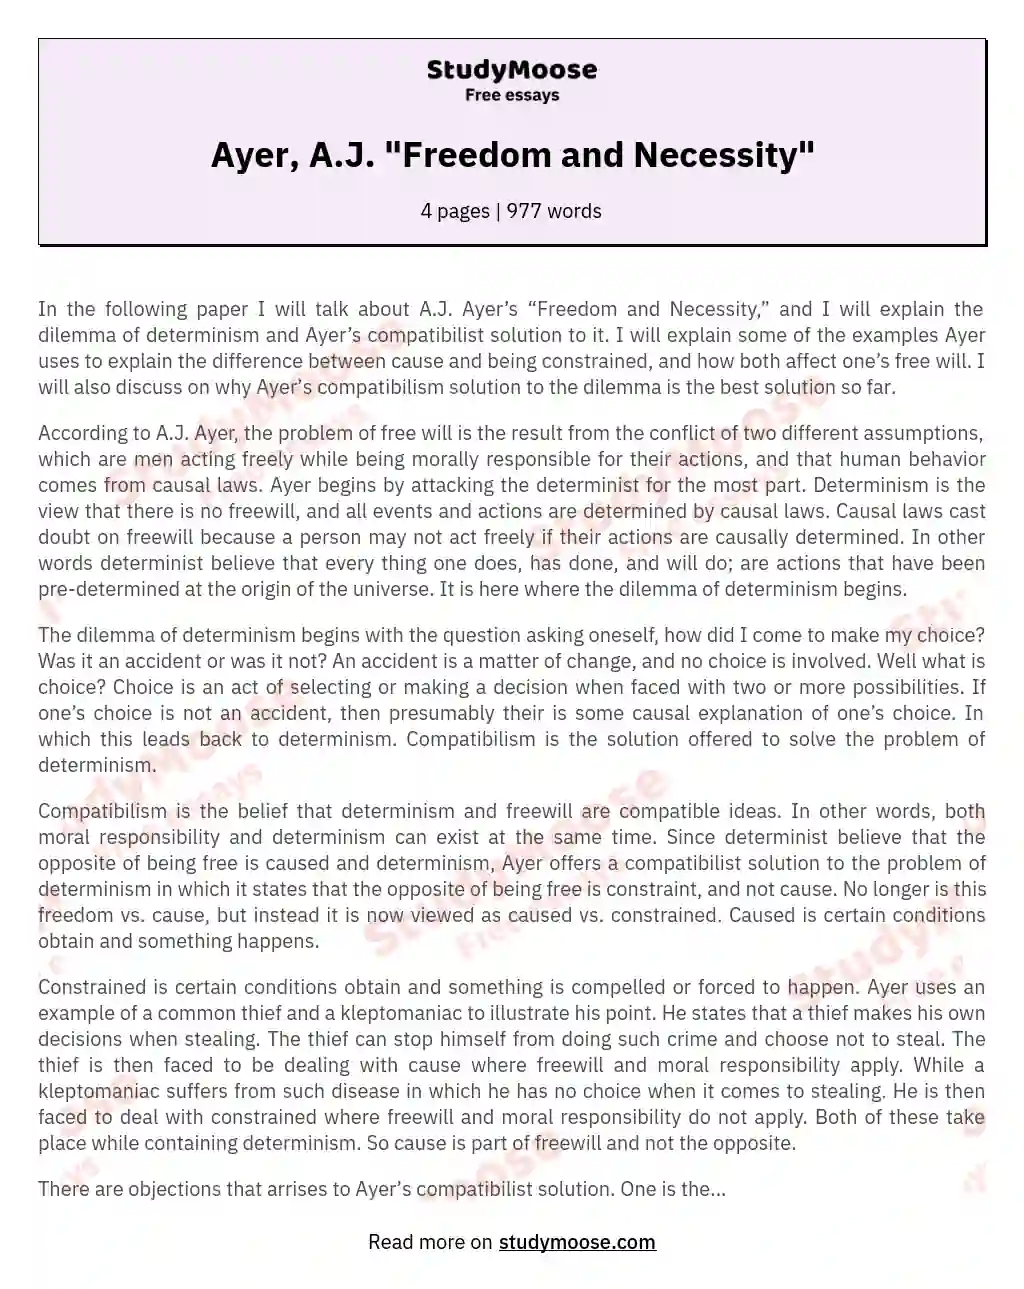 Ayer, A.J. "Freedom and Necessity" essay